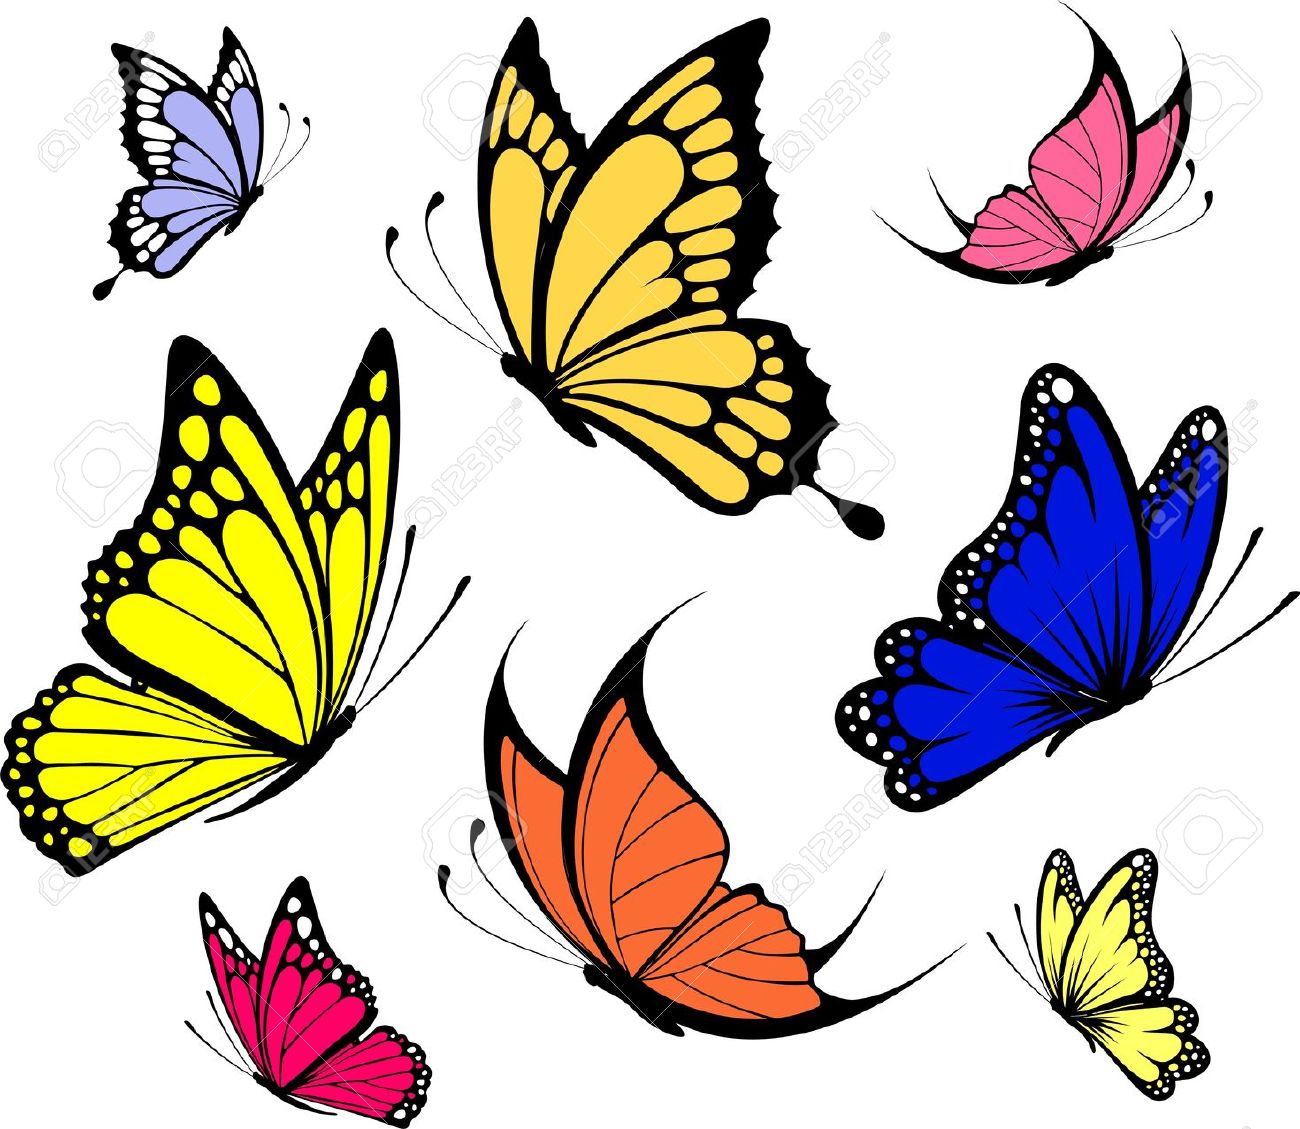 clip art free butterfly - photo #41